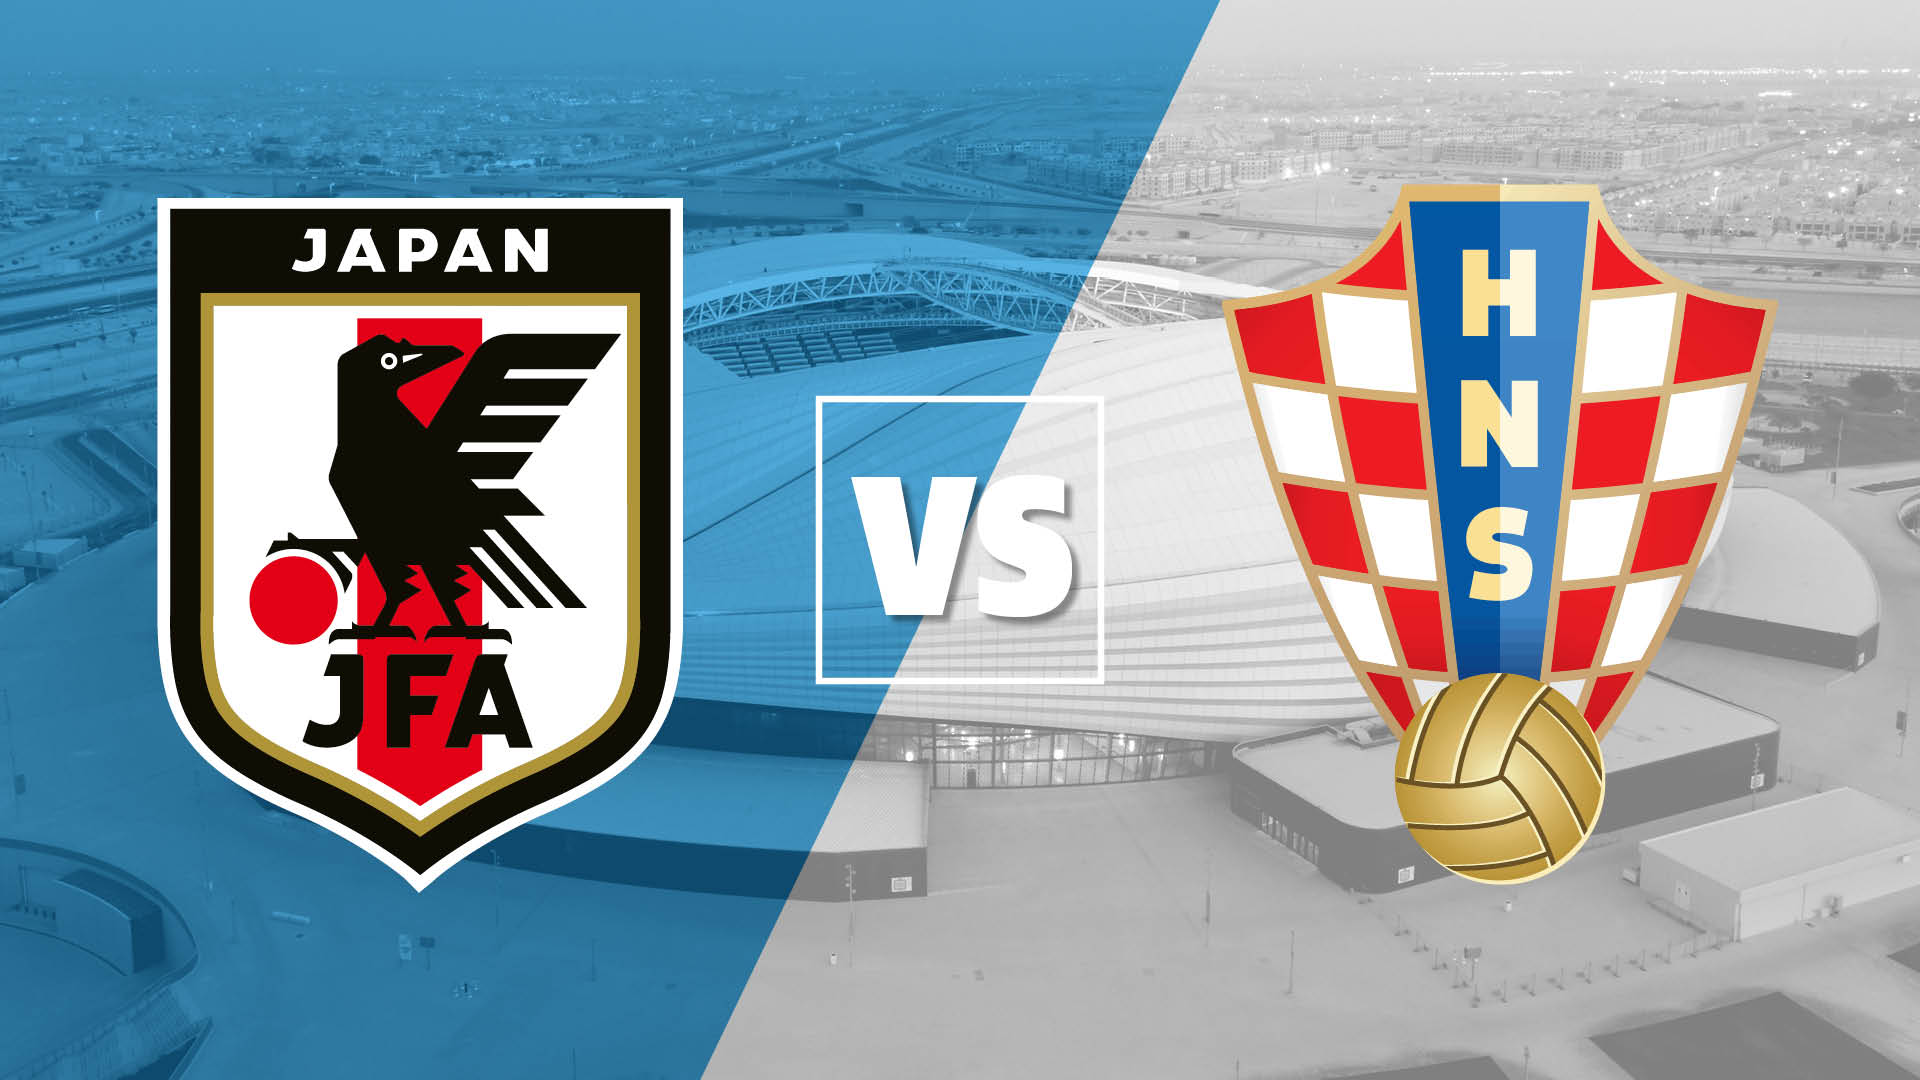 Japan vs Croatia live stream and how to watch the 2022 FIFA World Cup in 4K HDR